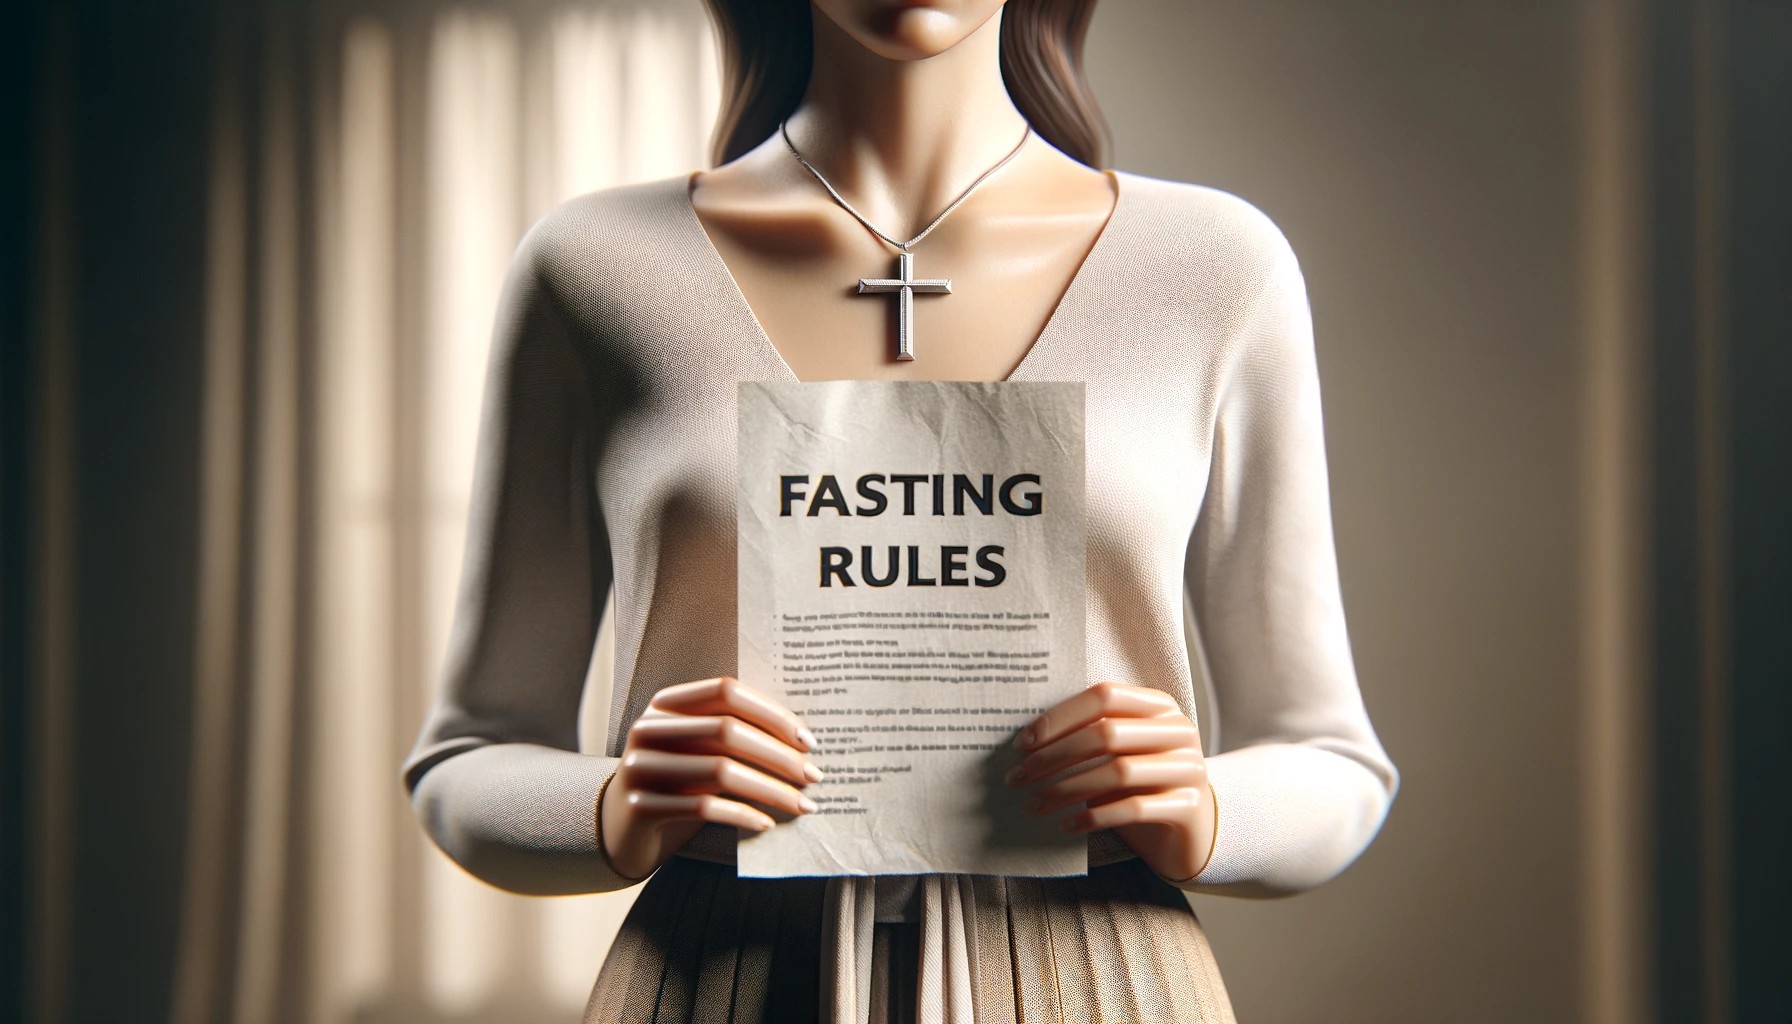 What Are The Rules Of Fasting During Lent